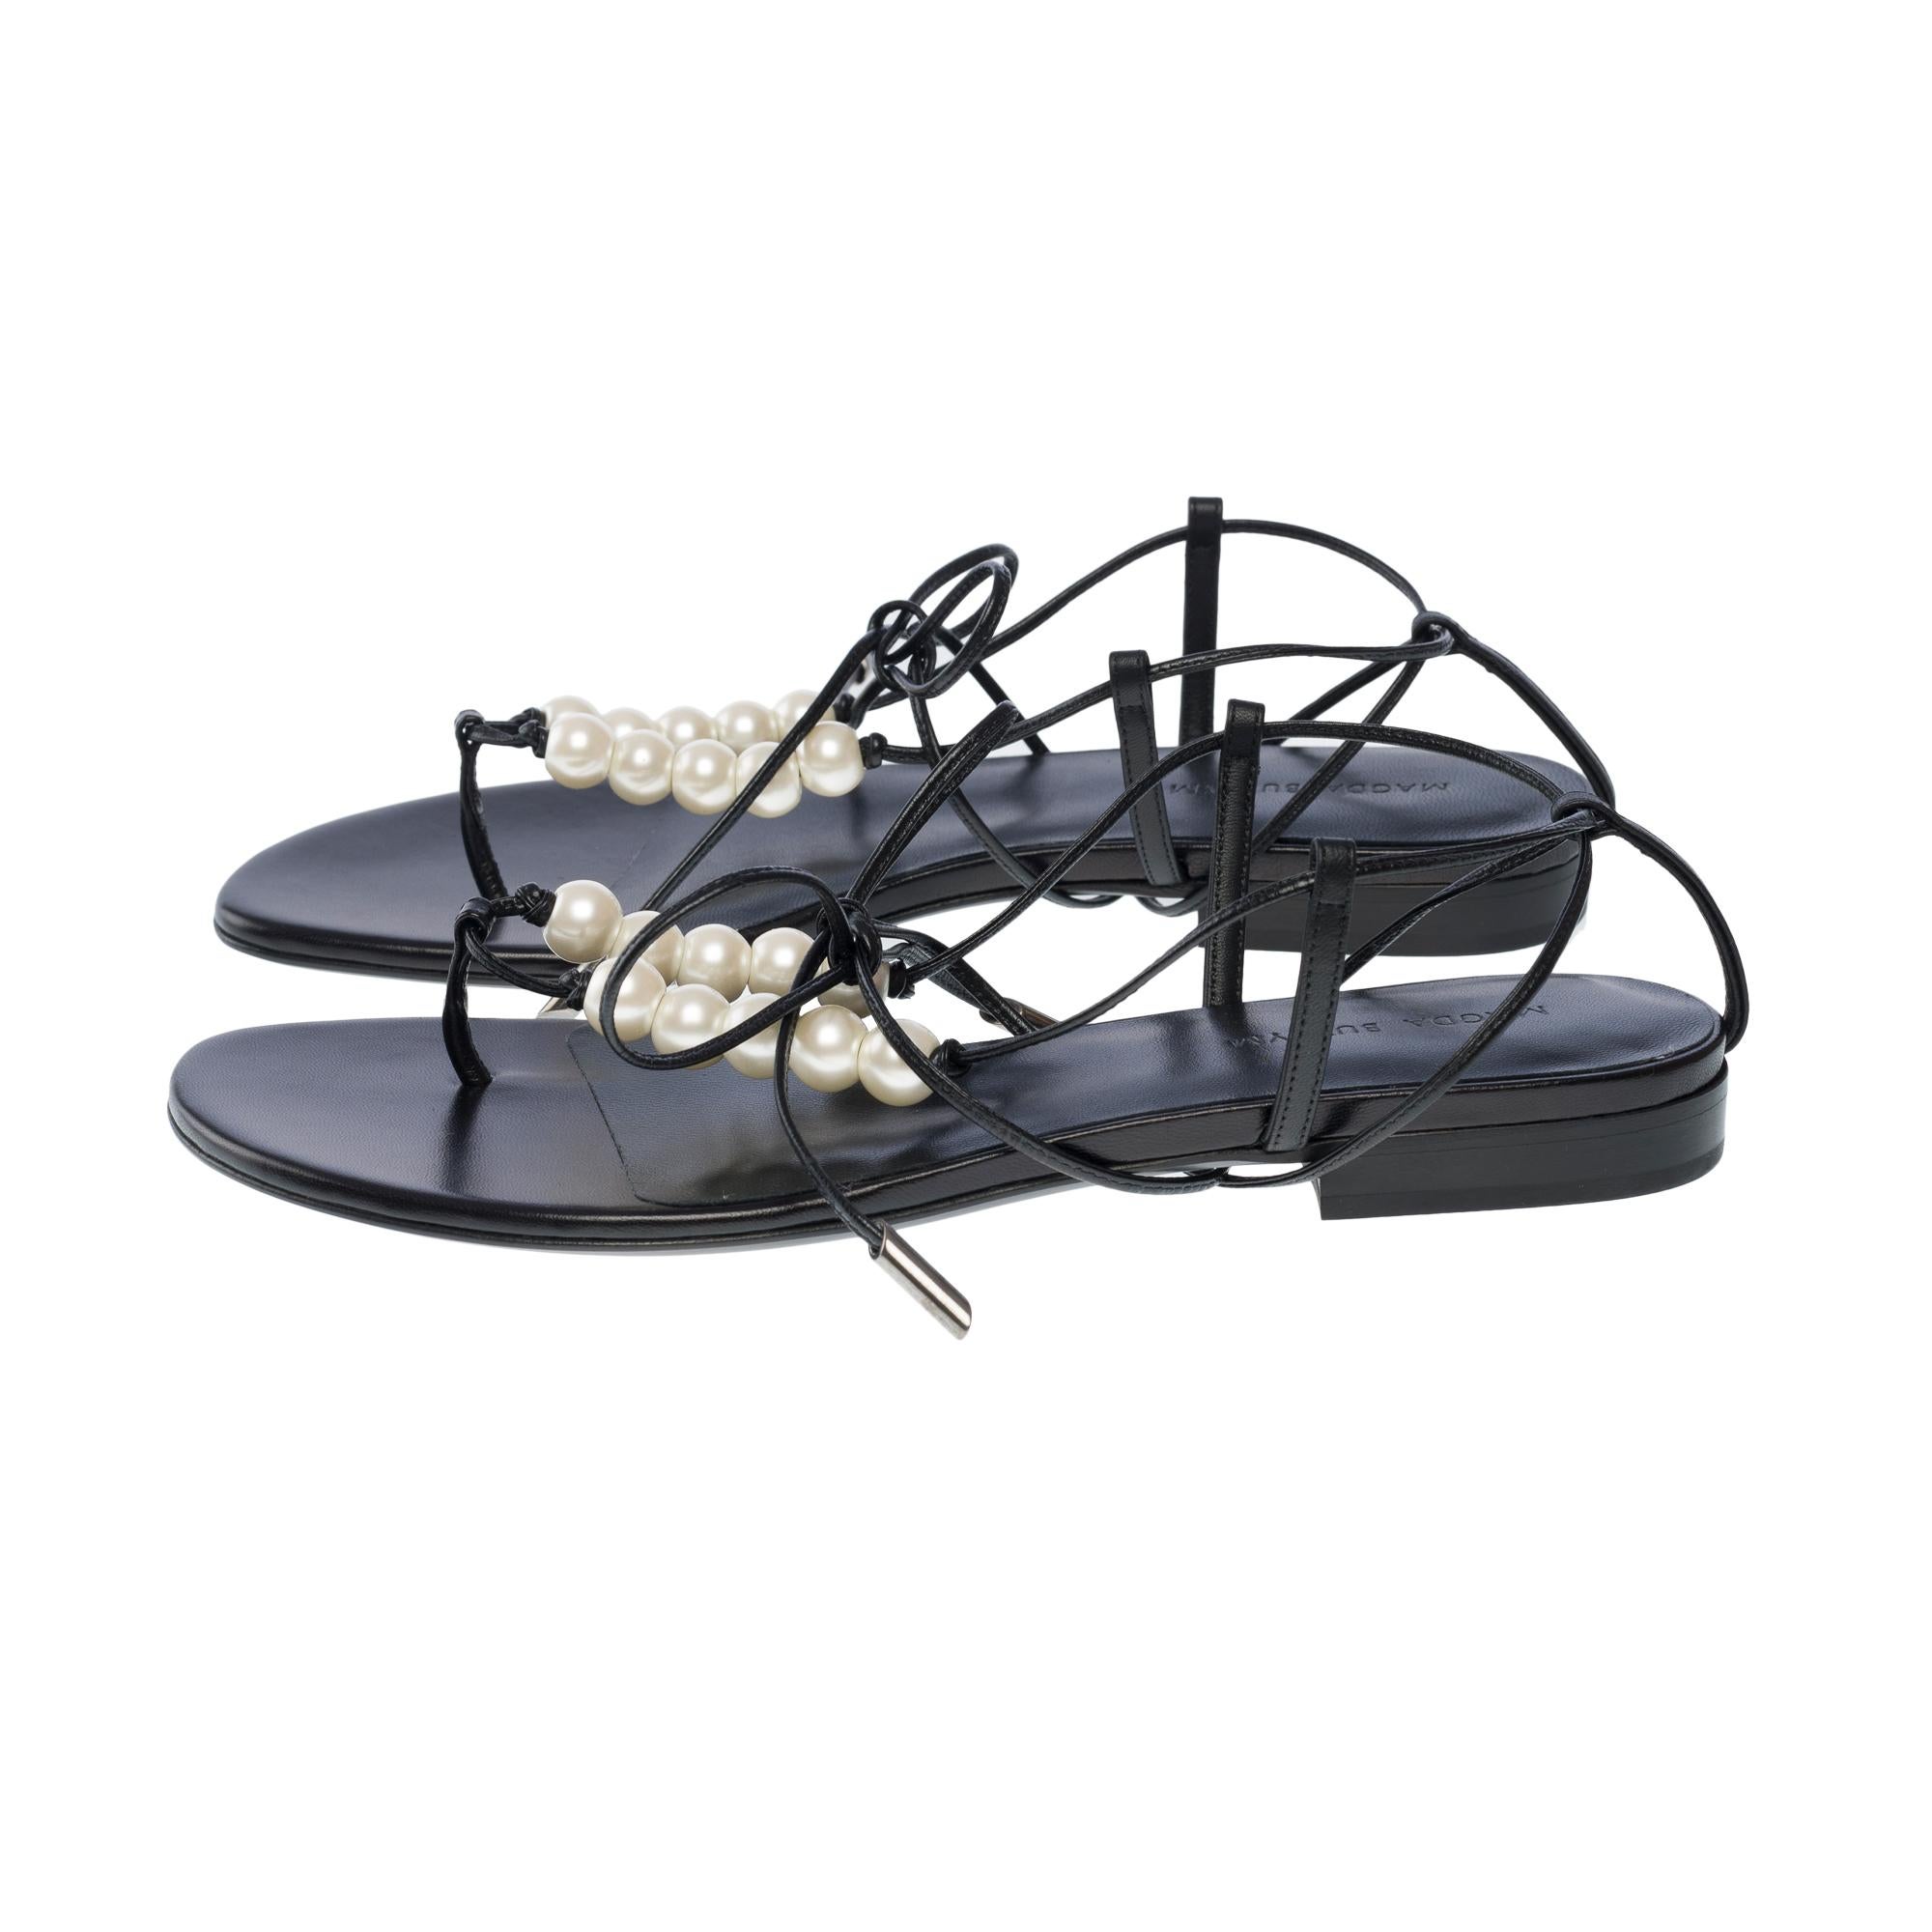 New Magda Butrym Flat Sandals  in black leather and faux-pearl , Size 38 For Sale 1